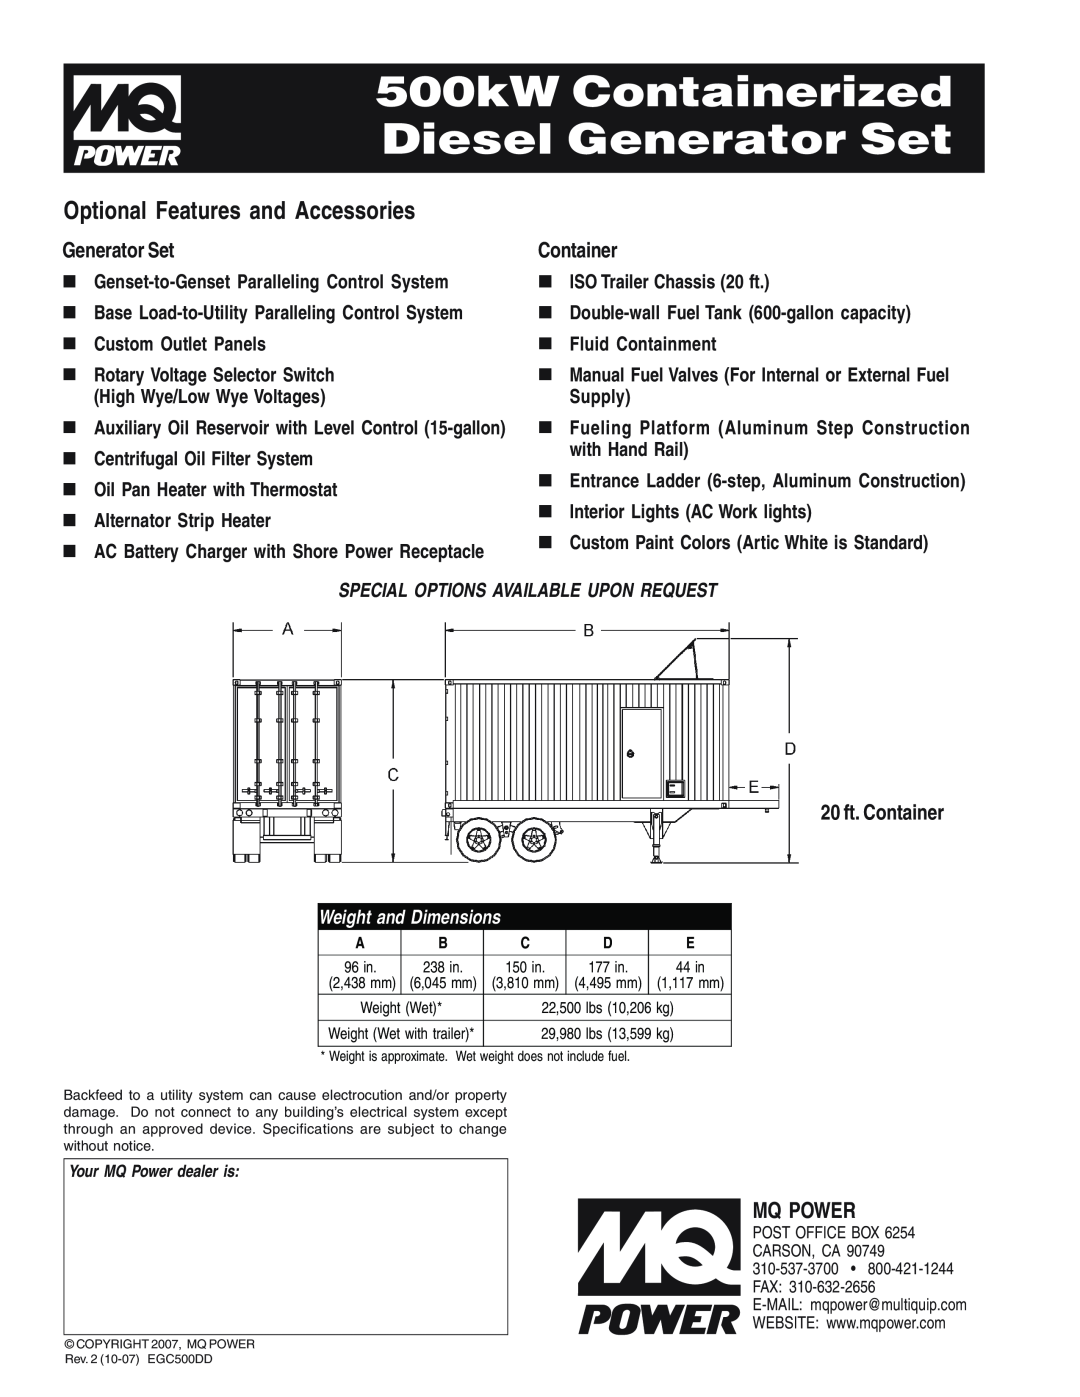 Multiquip EGC500DD Optional Features and Accessories, Generator Set, 20 ft. Container, Weight and Dimensions, Mq Power 